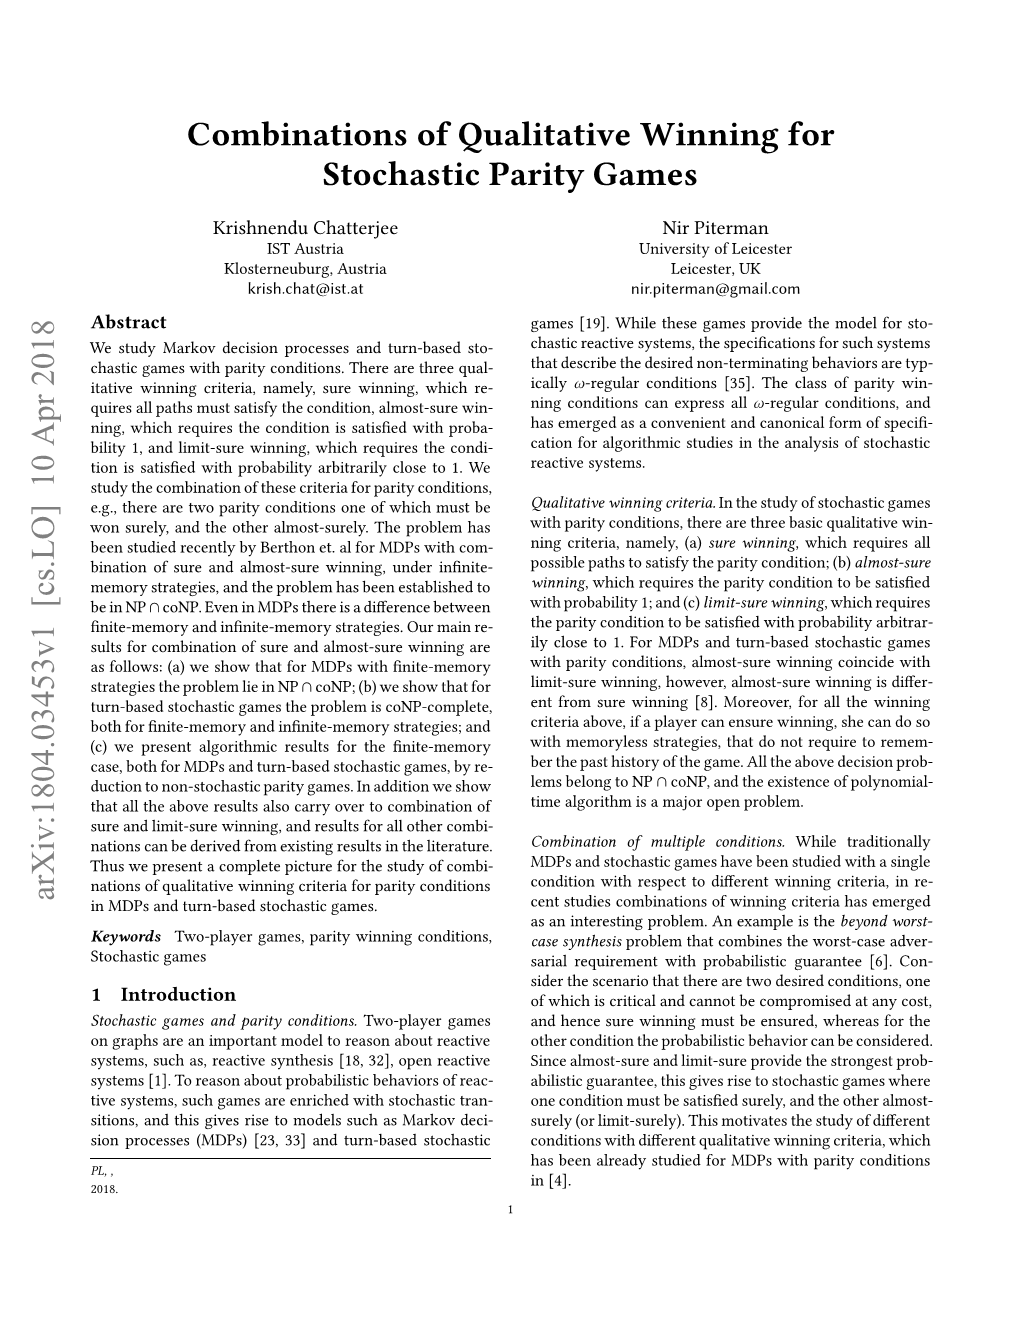 Combinations of Qualitative Winning for Stochastic Parity Games